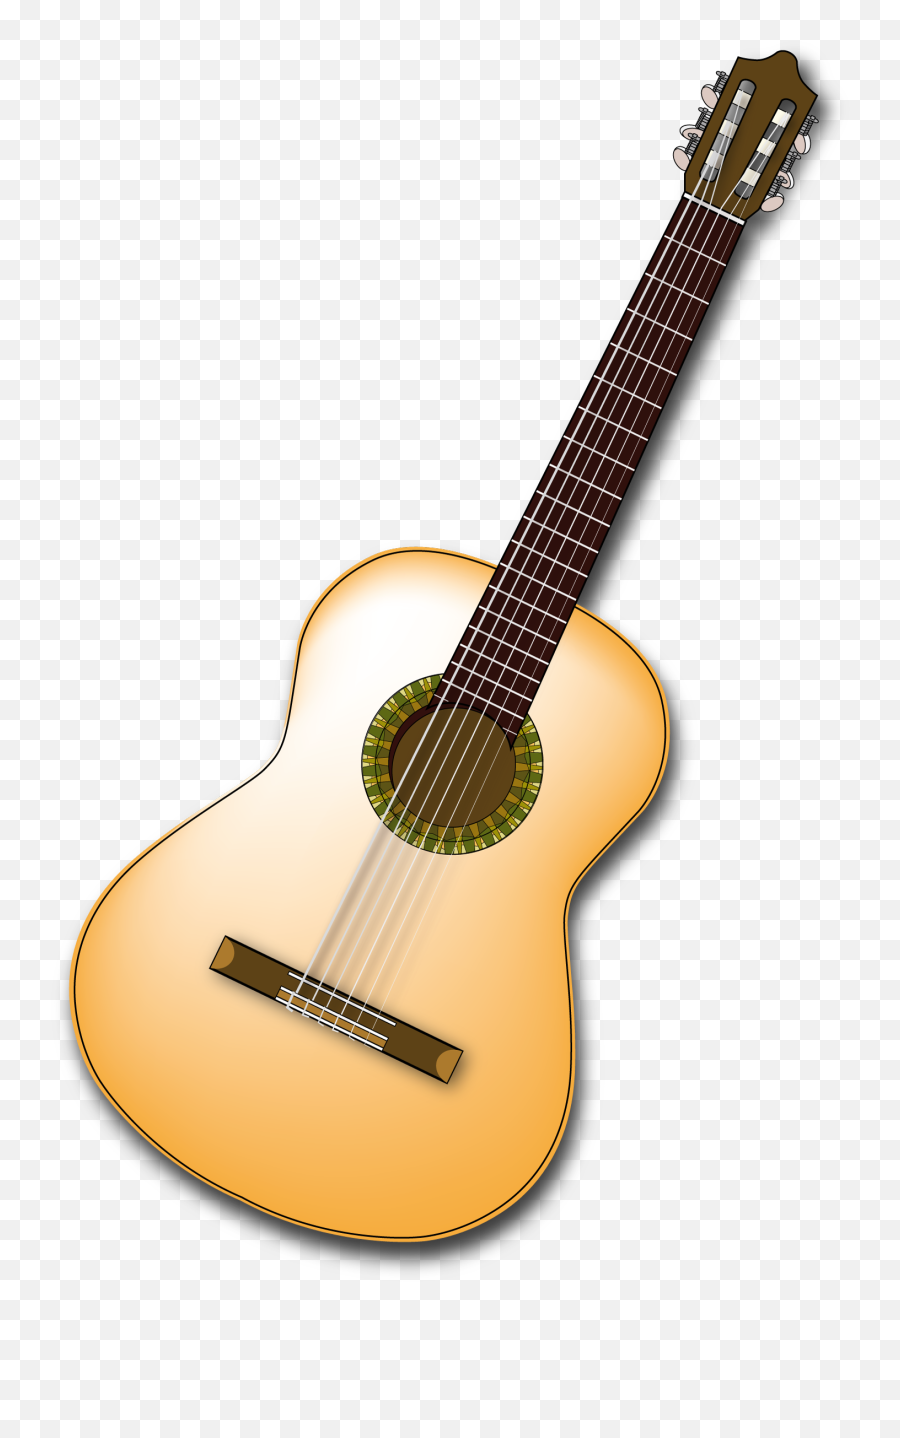 Download Own Classical Wooden Make Your Guitar Instrument Emoji,Instrument Clipart